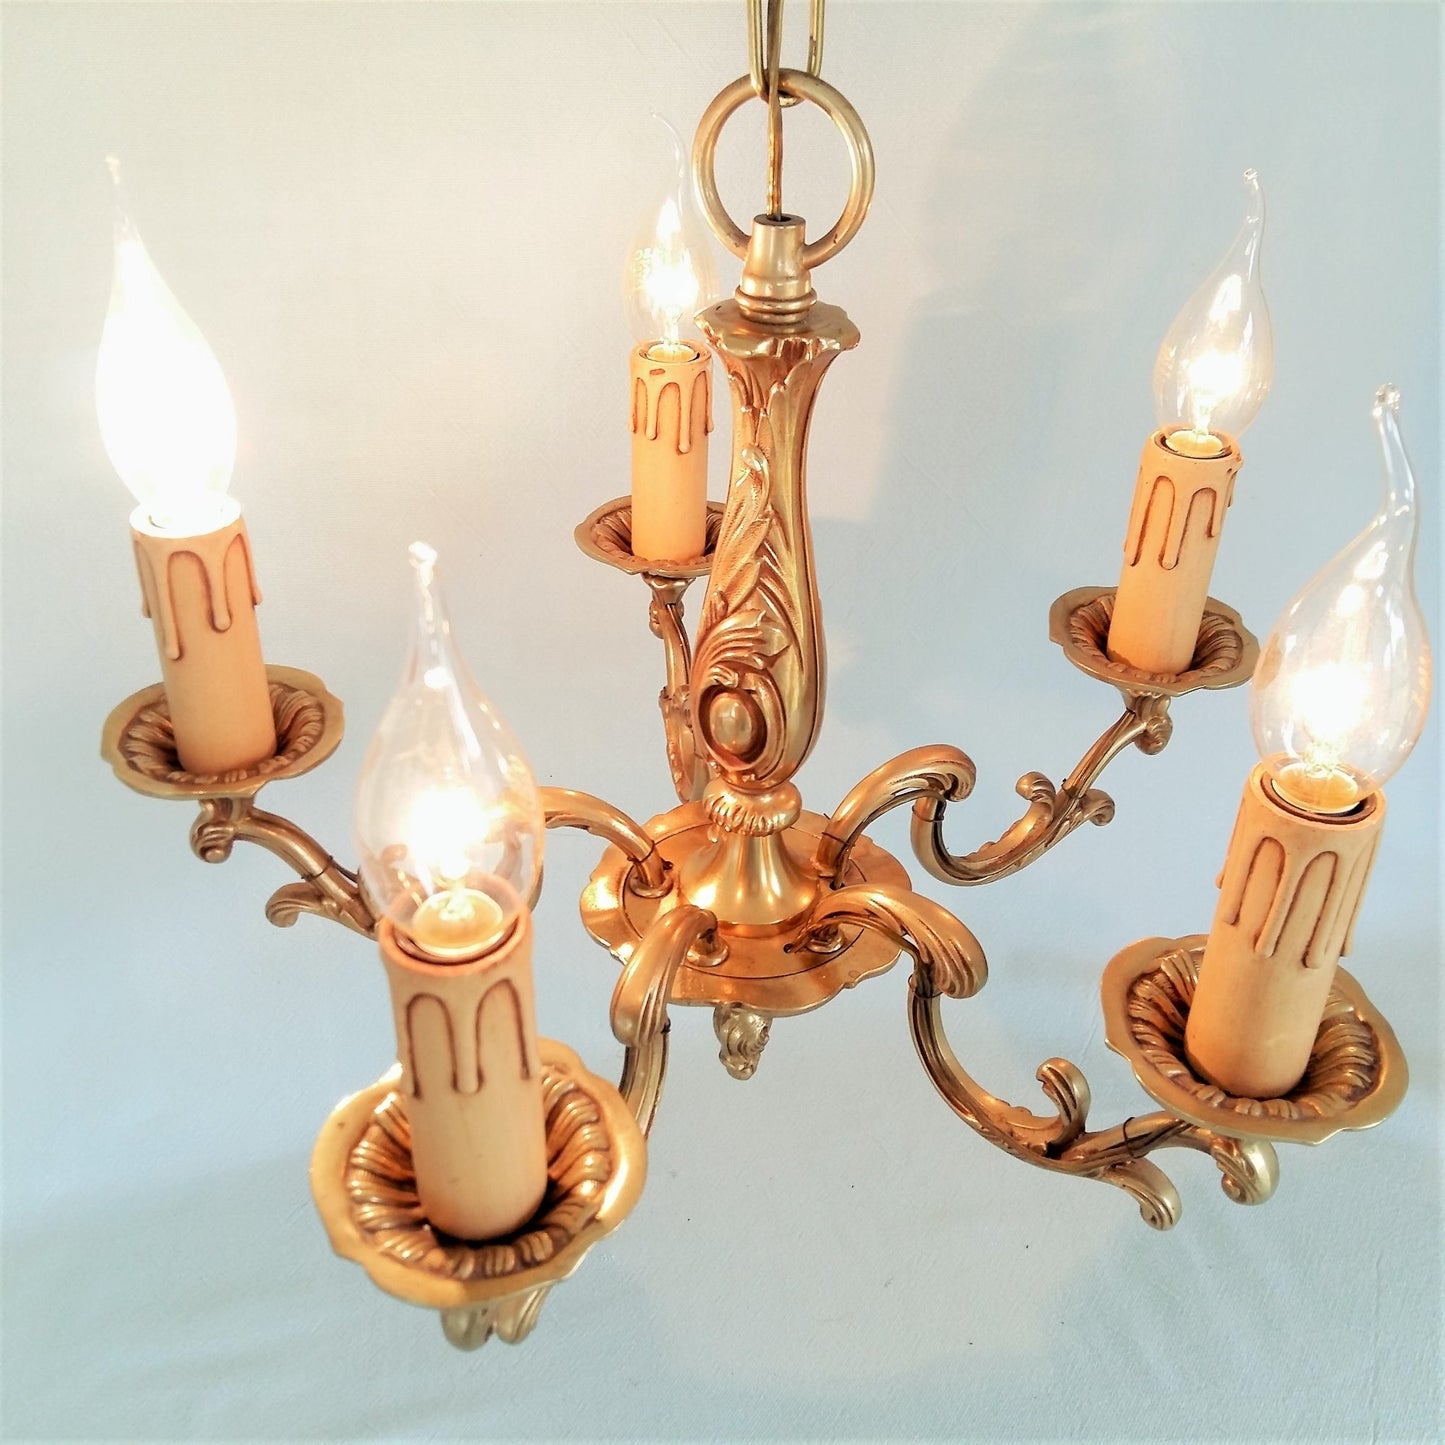 Antique Bronze 5 Arm Chandelier. from Tiggy & Pip - €260.00! Shop now at Tiggy and Pip